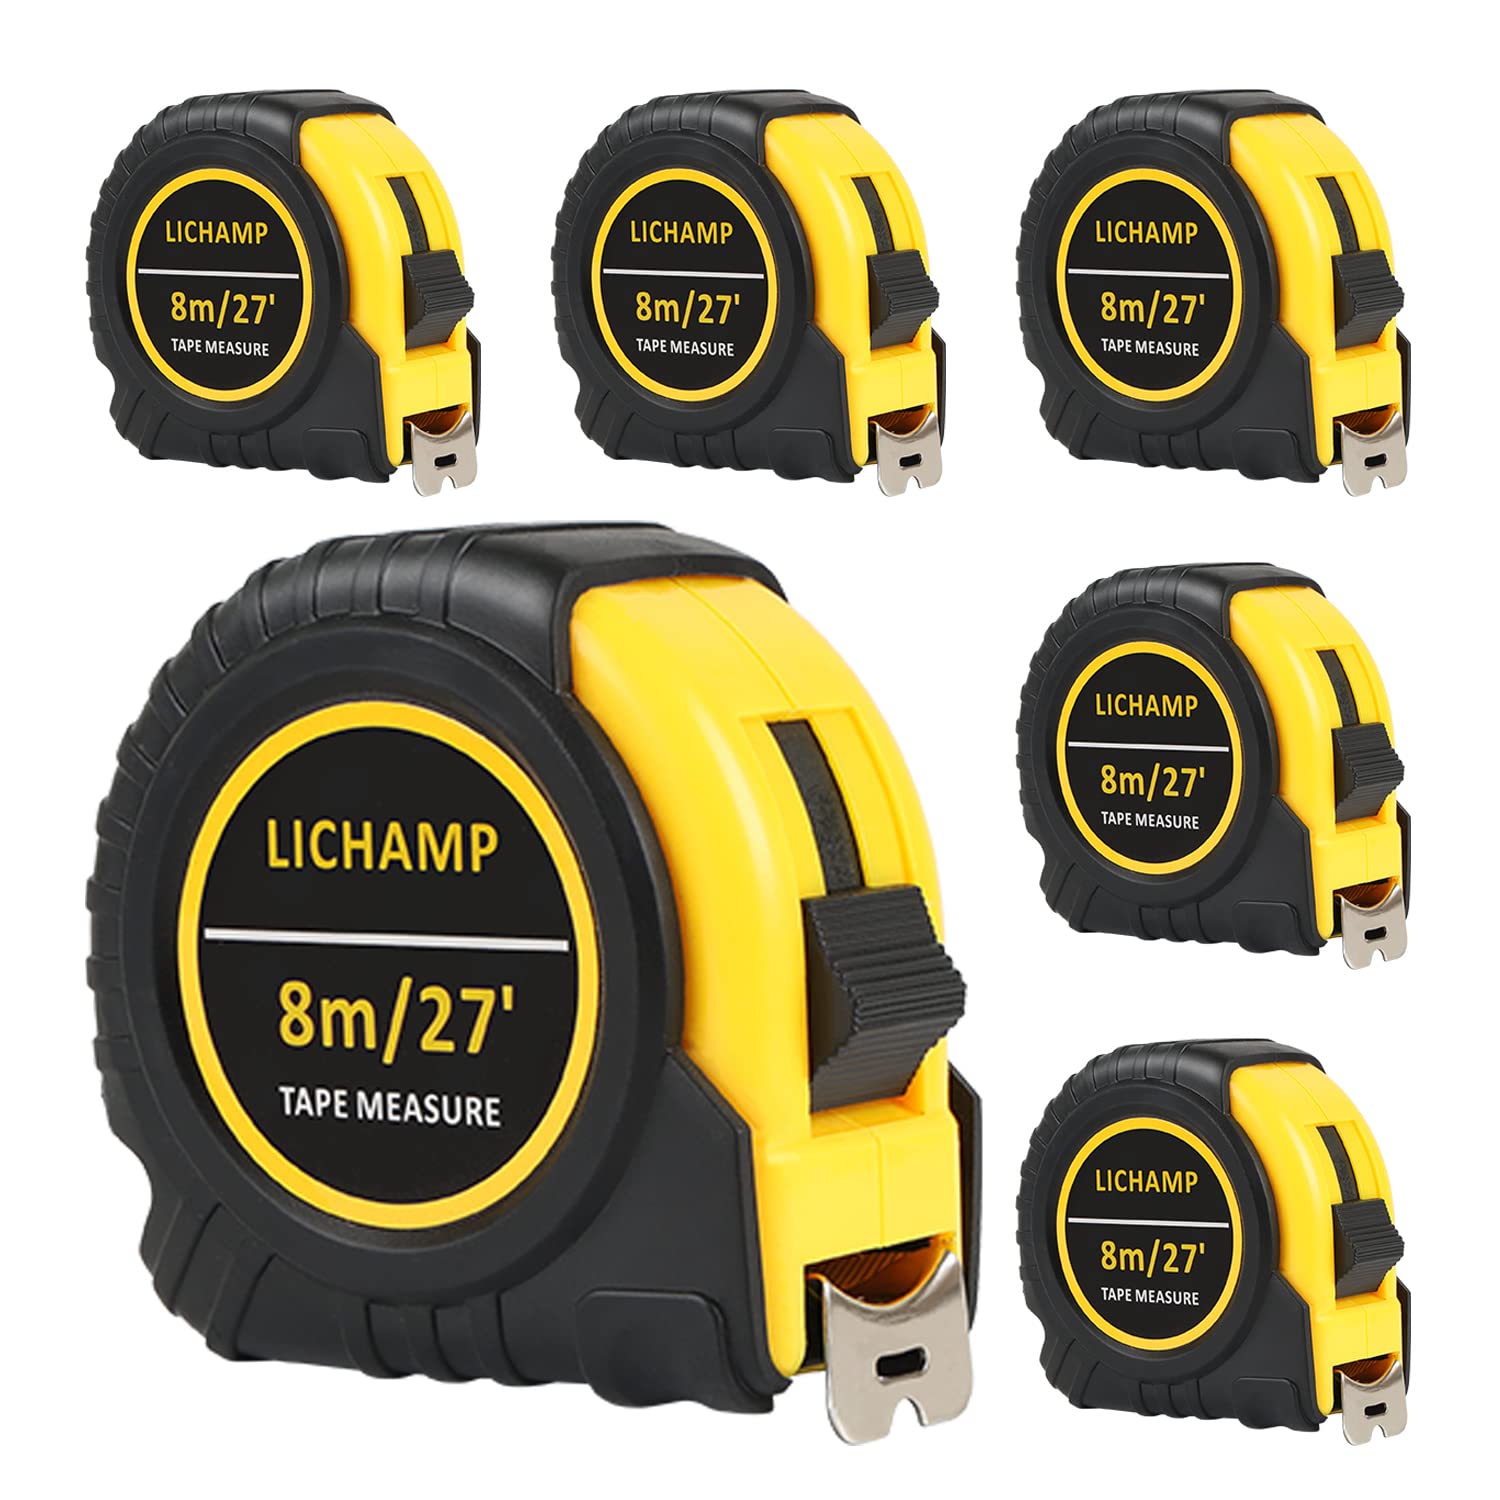 LICHAMP Tape Measure 30-Foot 2 Pack Bulk Easy Read Measuring Tape Retractable Metric/Fractional Measurement Tape 29.5FT/9M by 1-Inch